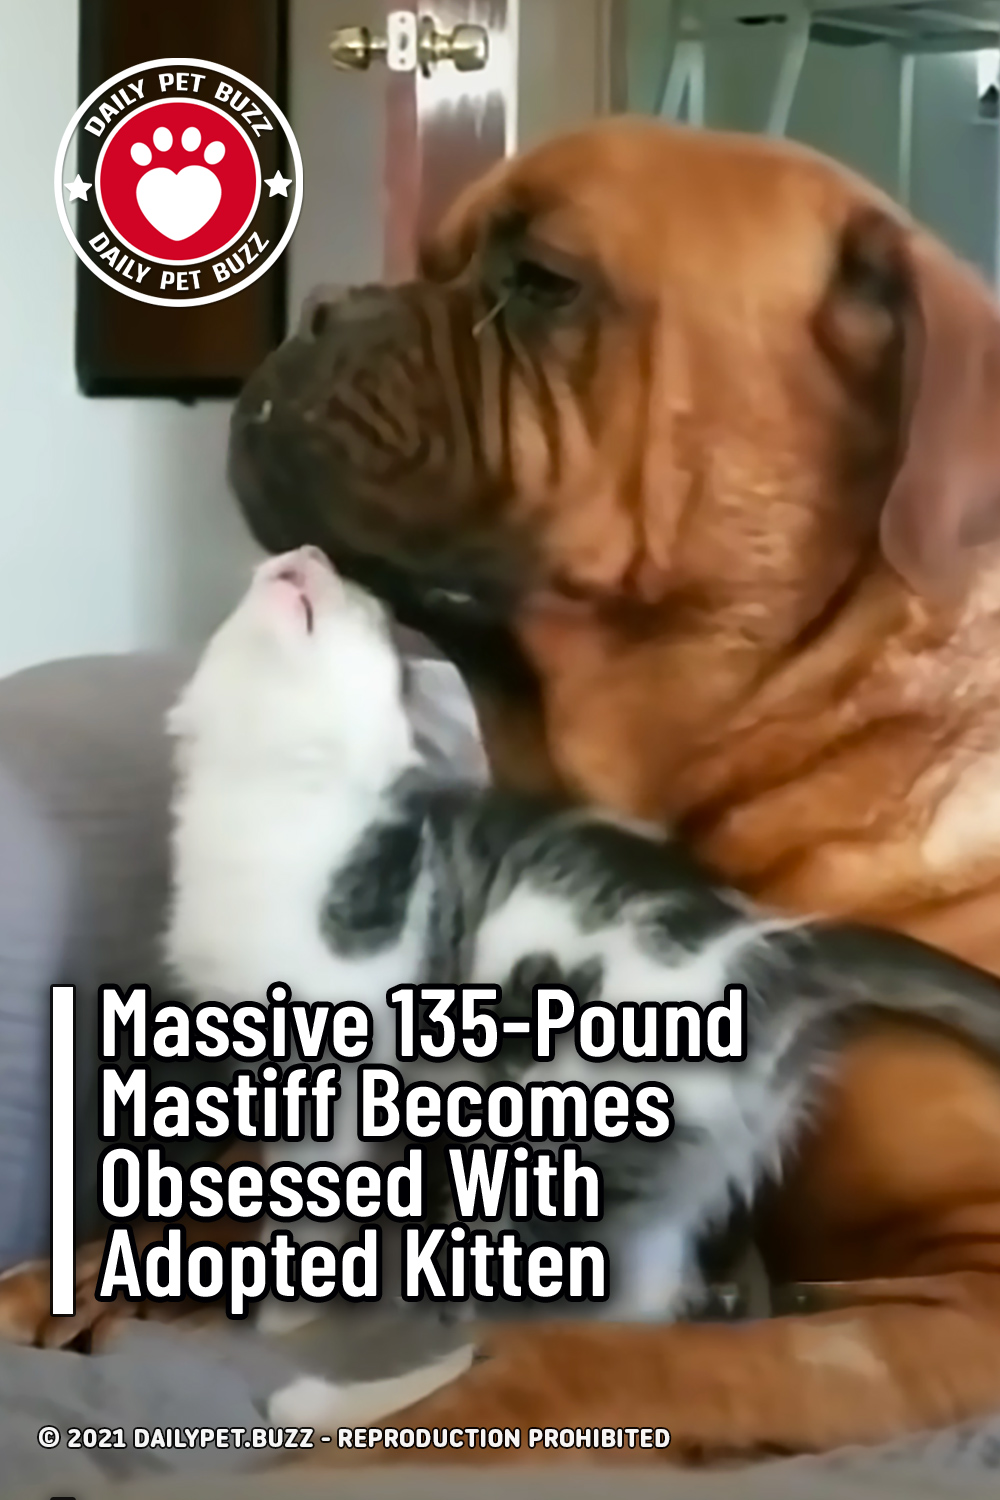 Massive 135-Pound Mastiff Becomes Obsessed With Adopted Kitten